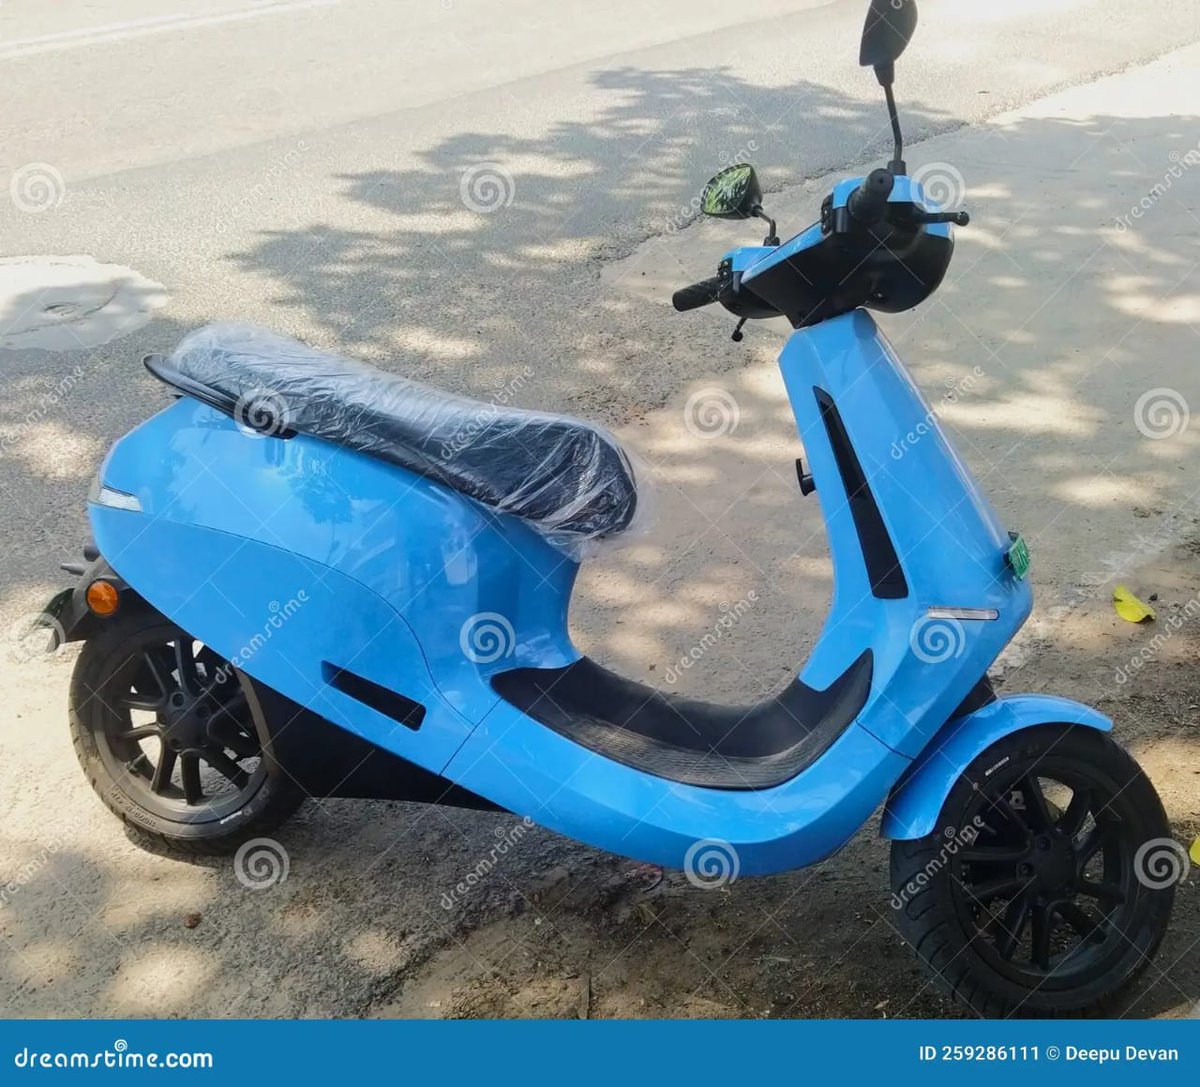 Embracing my passion for new tech led me to explore e-scooters, and after thorough research, I found the perfect match! With #Bajaj #AutoLoan, I secured an incredible deal, boasting a competitive interest rate. Excited to hit the road with my new ride! #AutoLoan